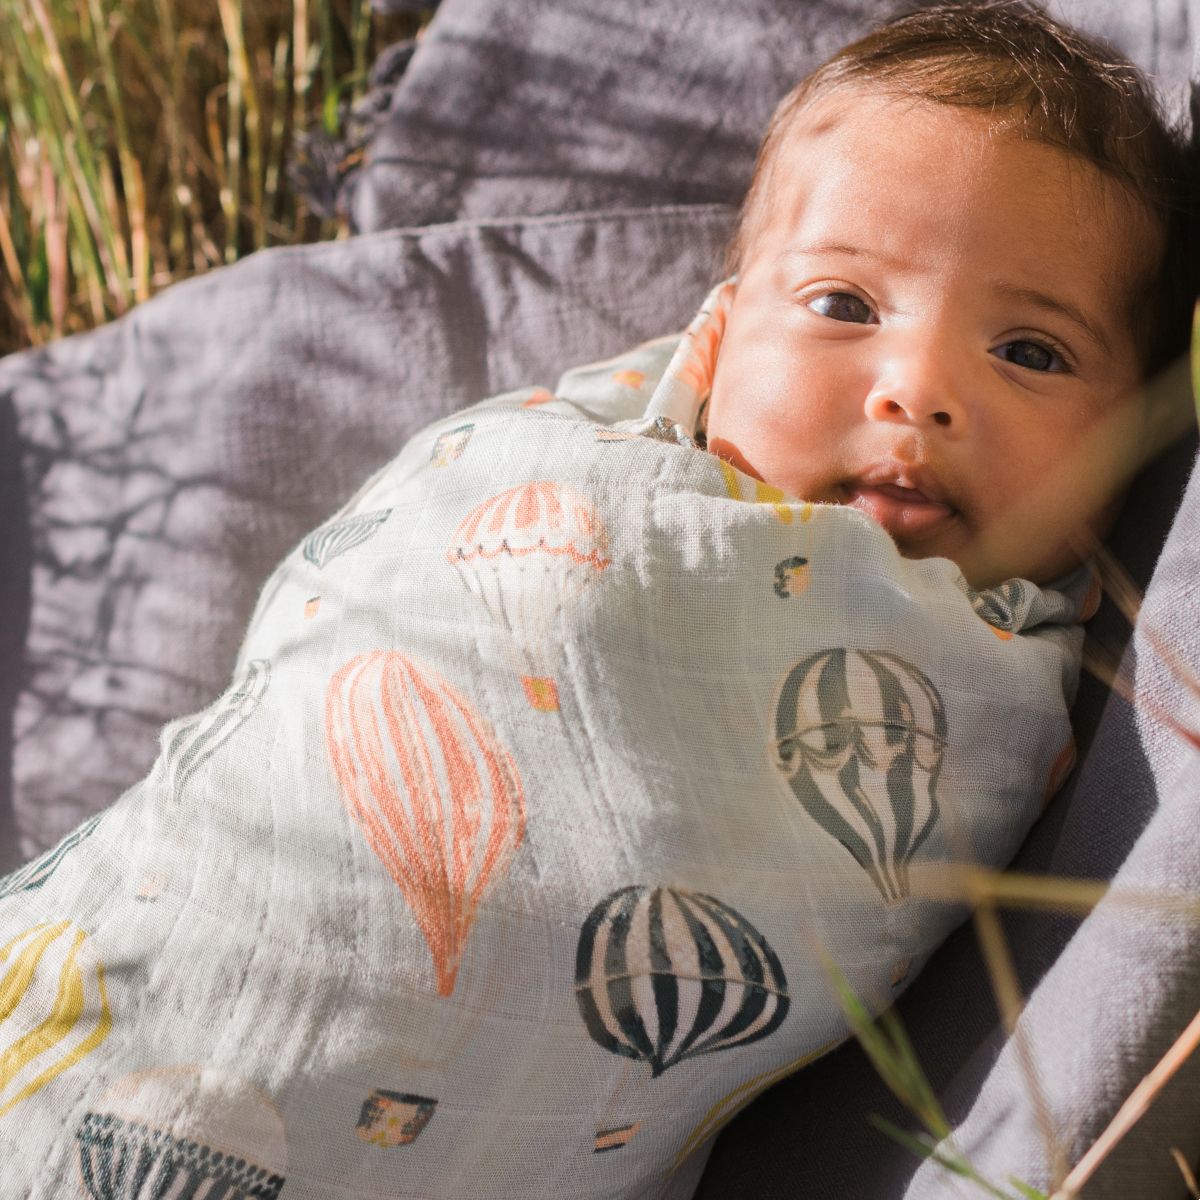 Baby resting in a field wrapped in the Vintage Balloons Muslin Swaddle Blanket by Milkbarn